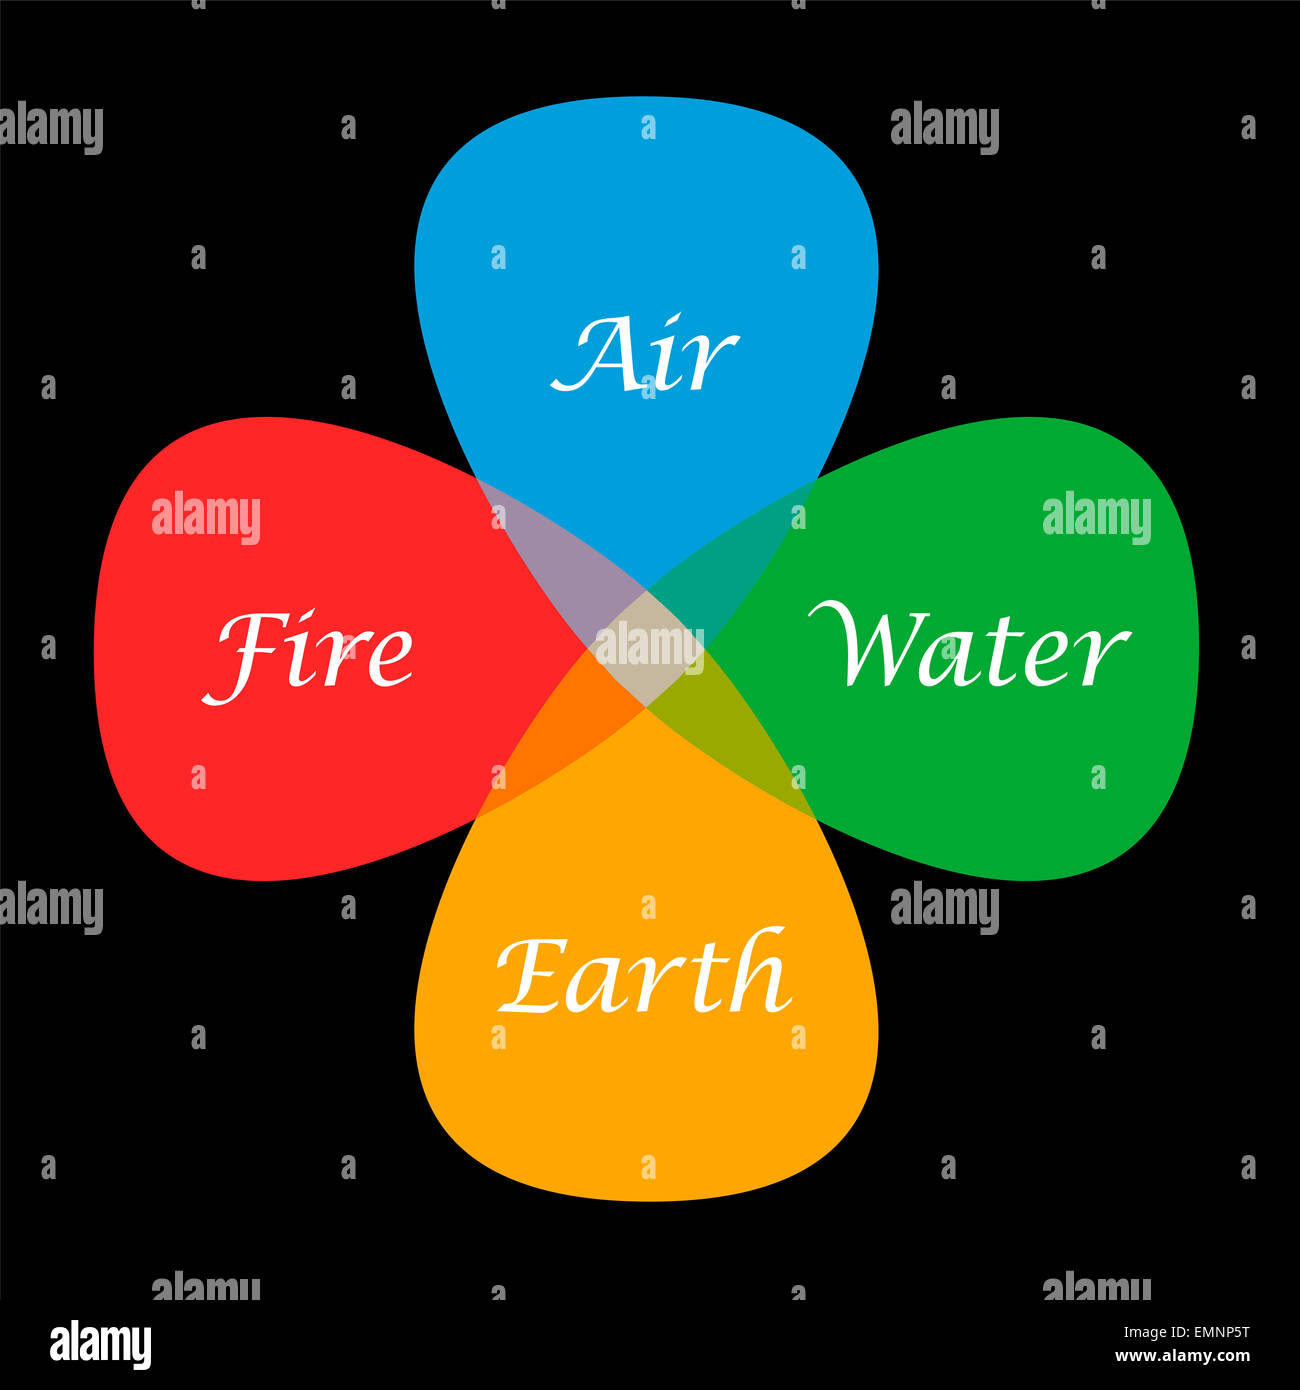 All 103+ Images how many elements are there earth wind fire water Completed